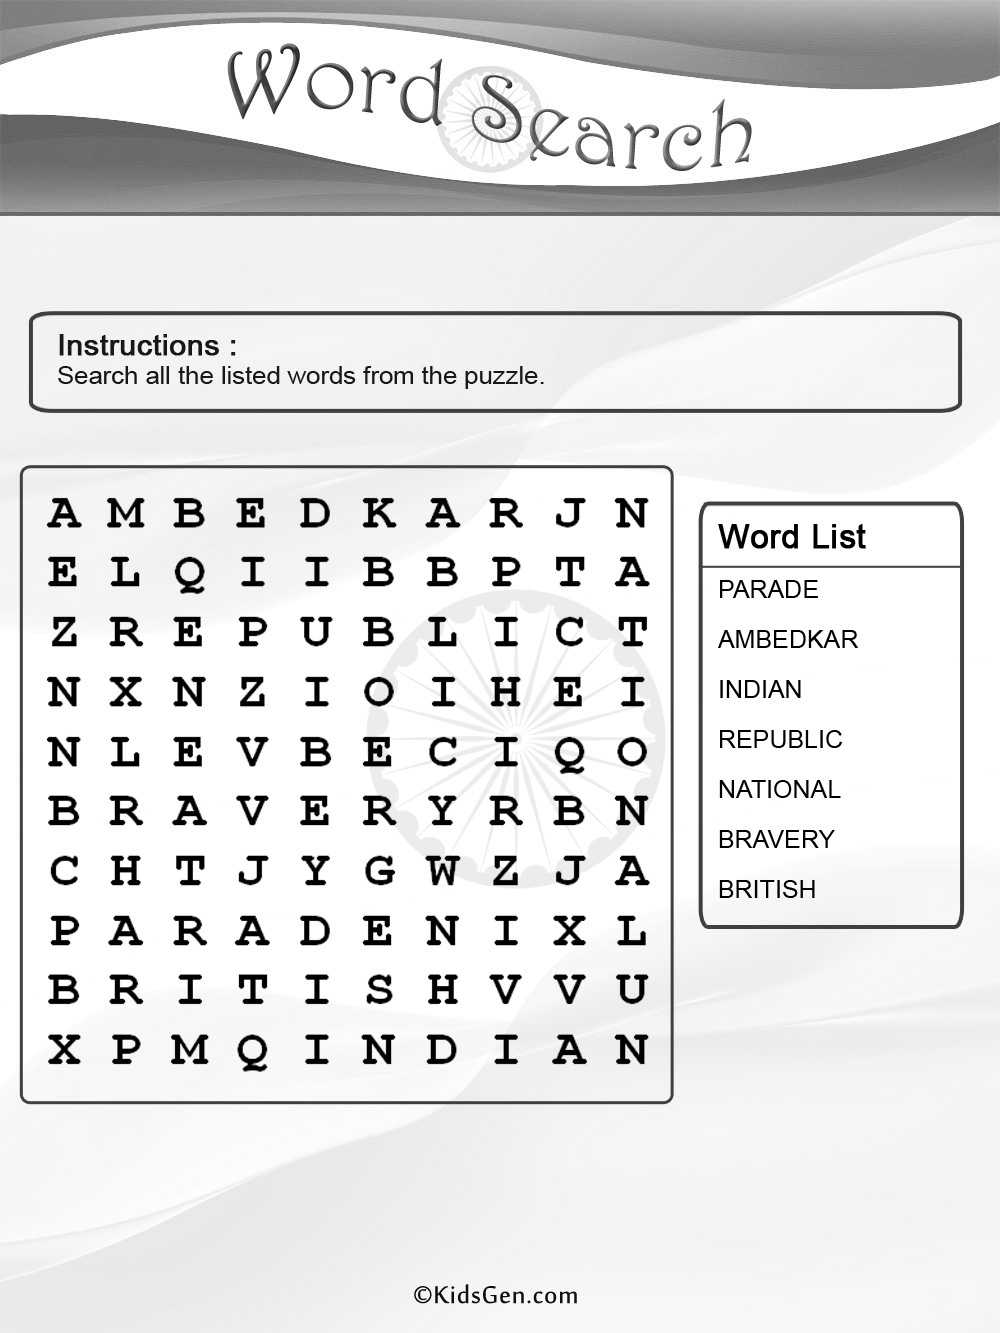 Indian Republic Day Black & White Word Search Puzzle Template Regarding Word Sleuth Template